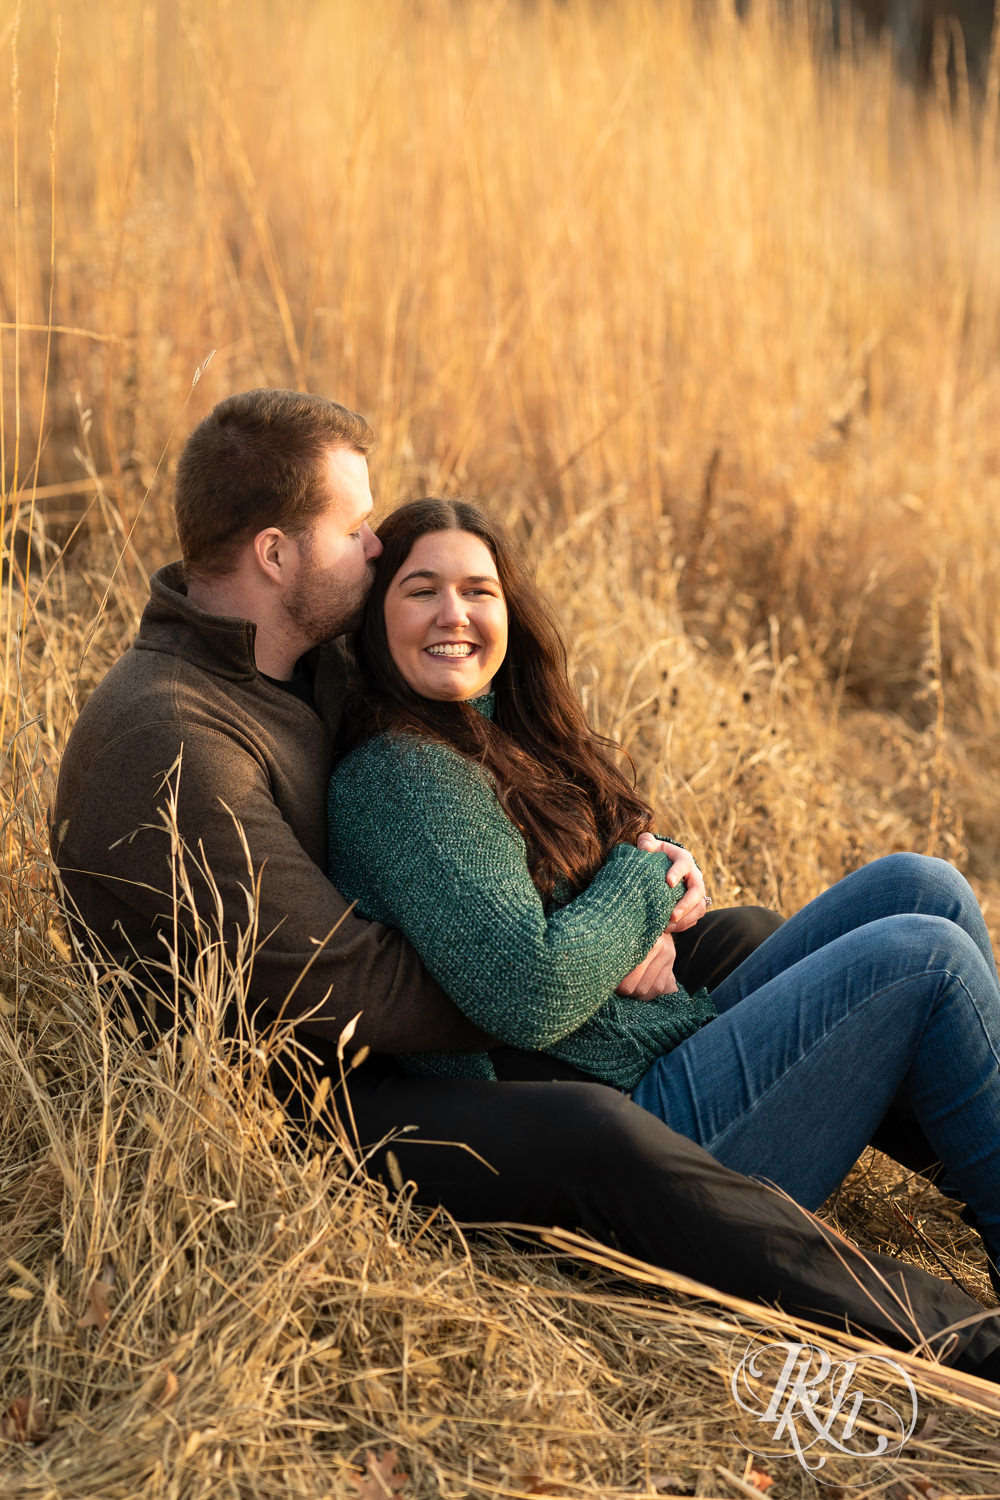 Man and woman smile and snuggle during winter engagement photography at Lebanon Hills in Eagan, Minnesota.